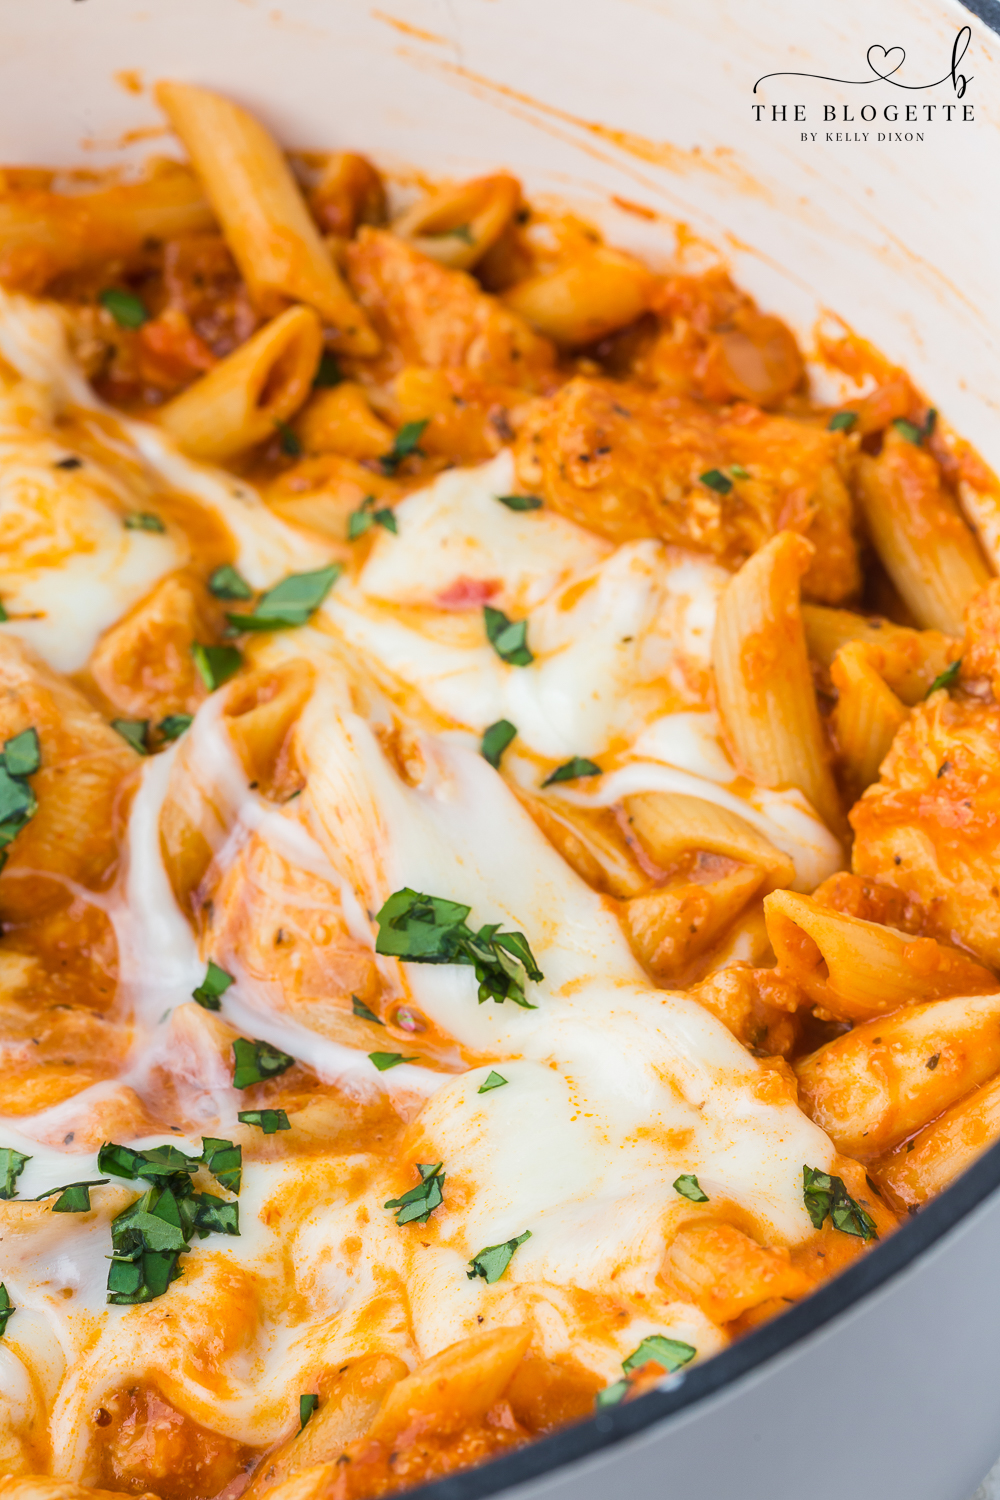 Looking for a quick and easy dinner idea? This one pot chicken parmesan pasta recipe is simple, tasty, and minimal clean-up!